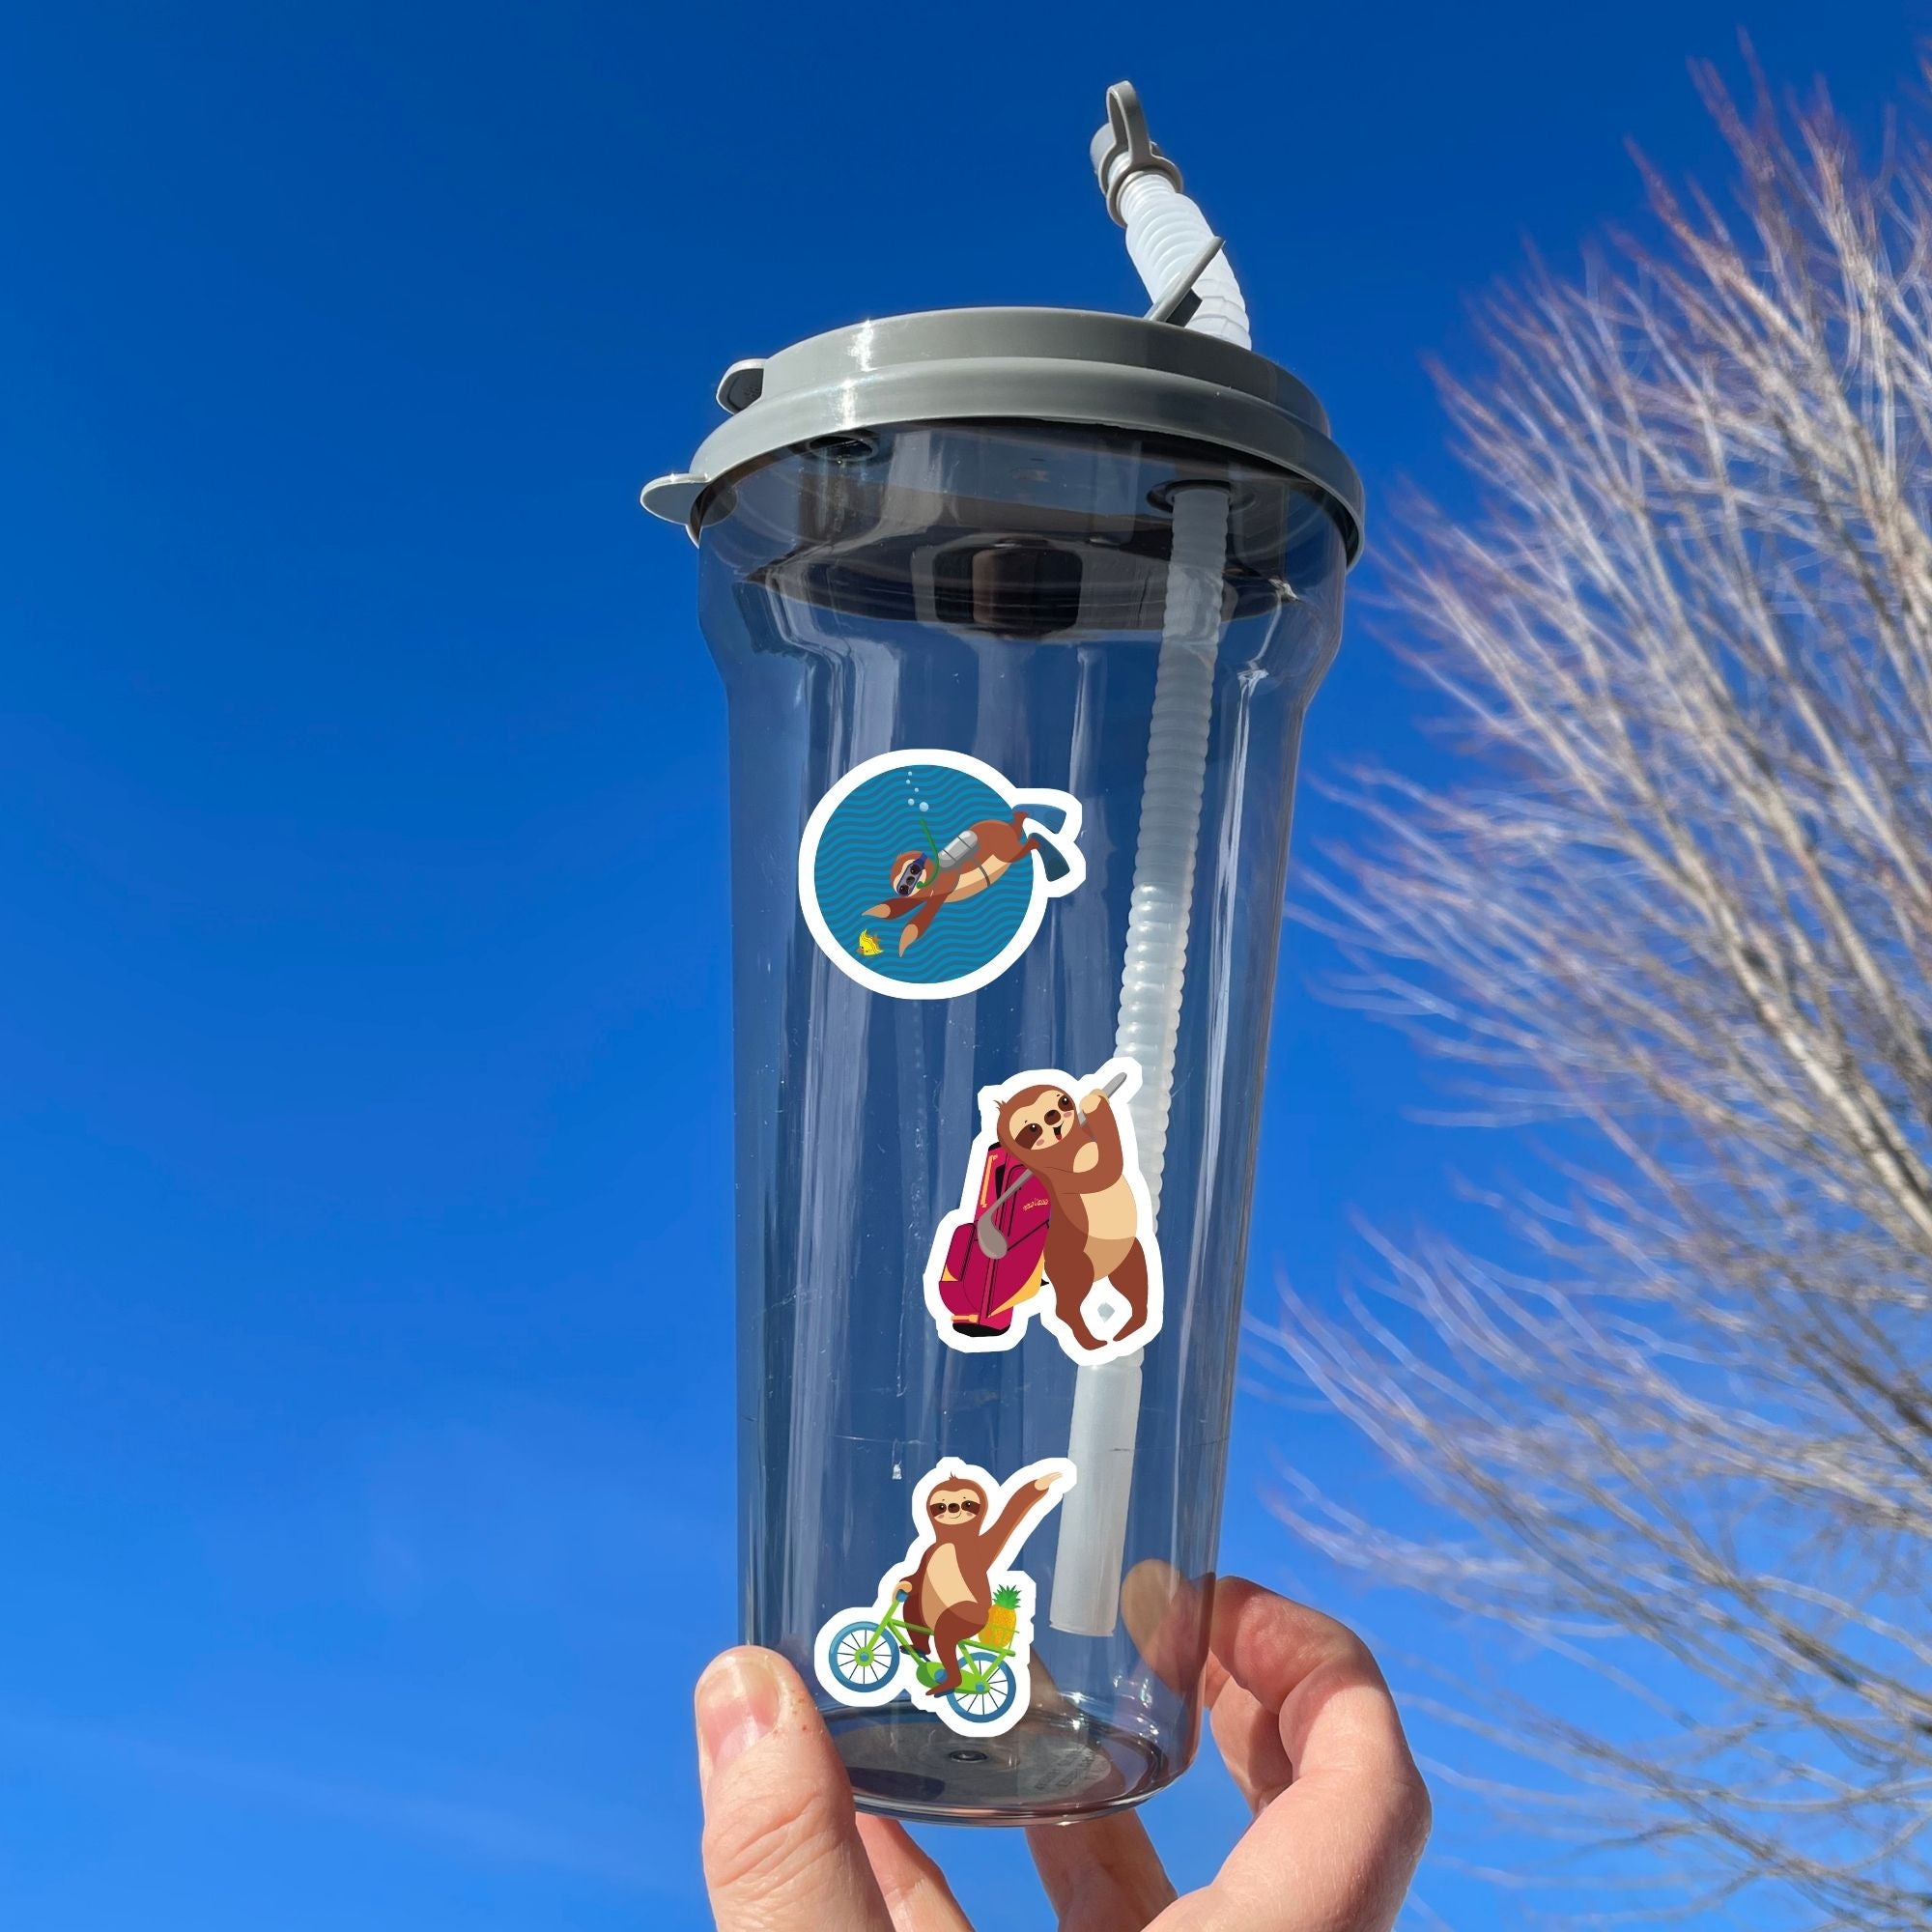 This image shows a water bottle with some of the Sloth Party! stickers applied.